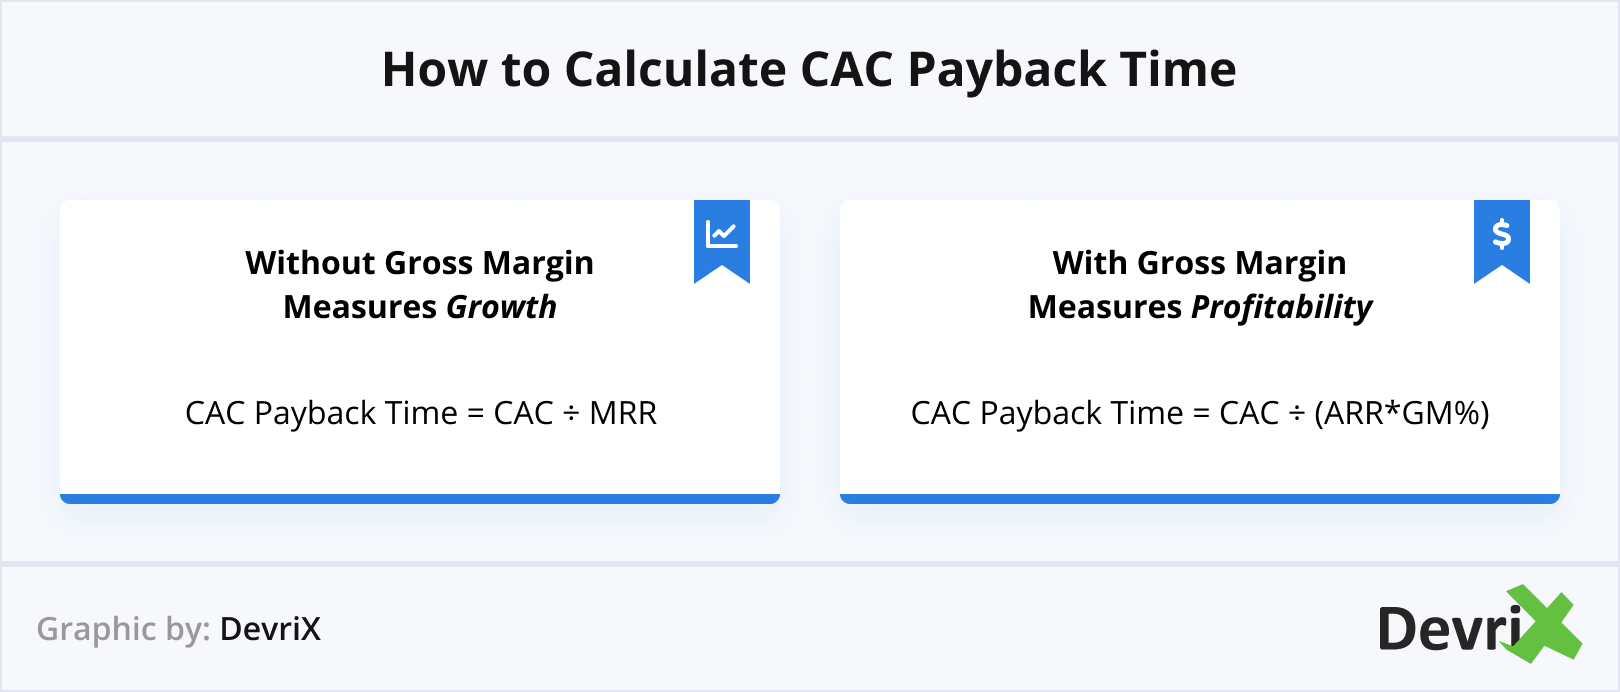 How to Calculate CAC Payback Time